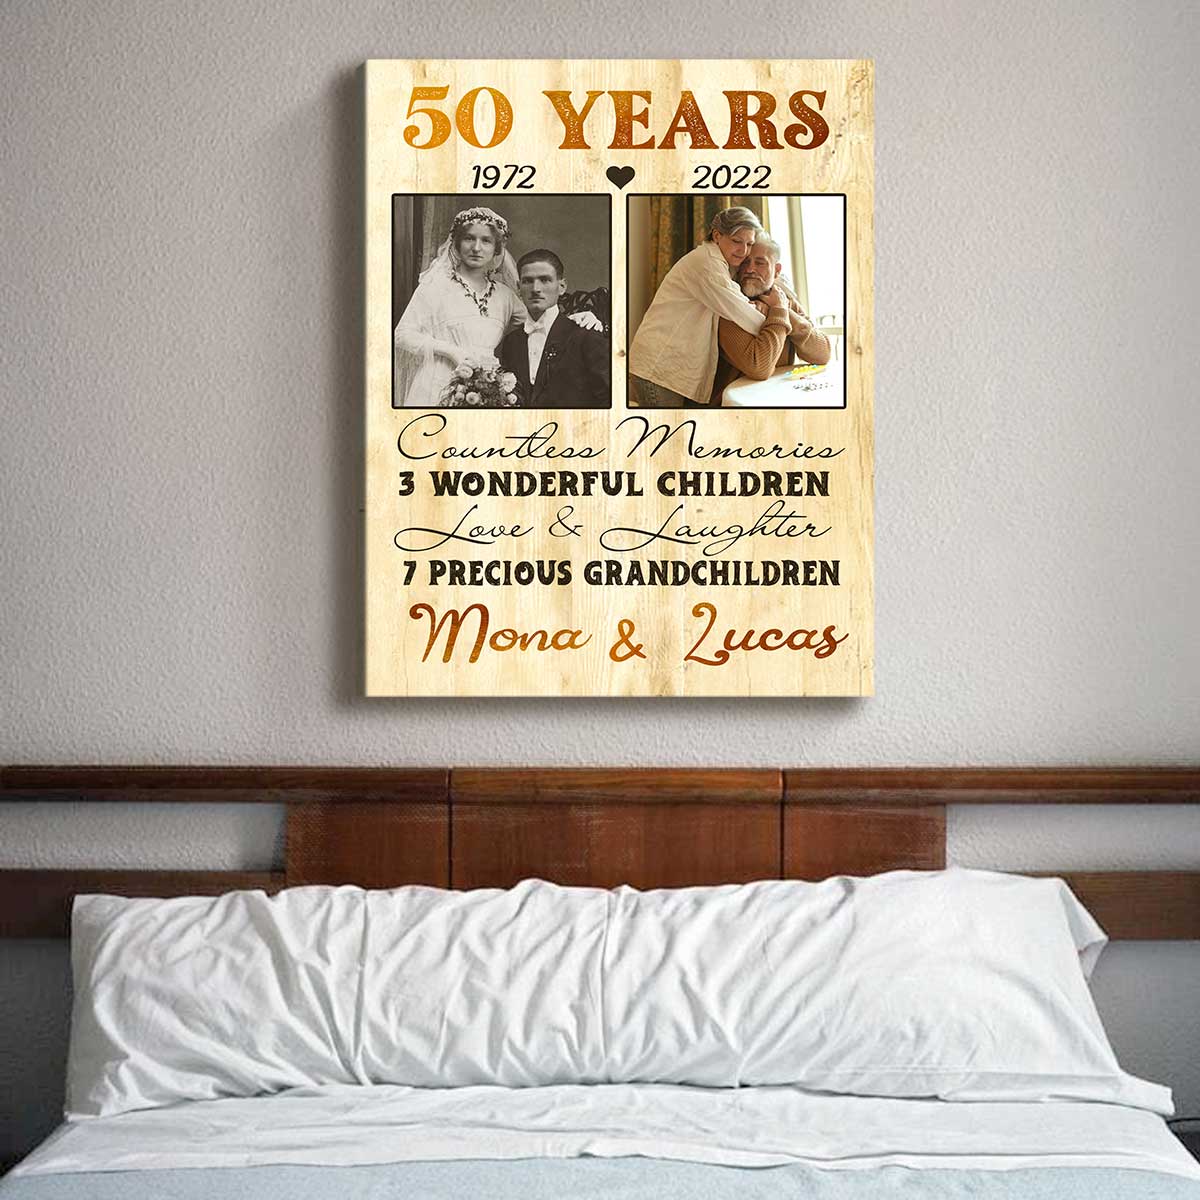 50th anniversary gifts for parents, Golden anniversary, Photo collage gift  - Shop Photo Mosaic Design Posters - Pinkoi